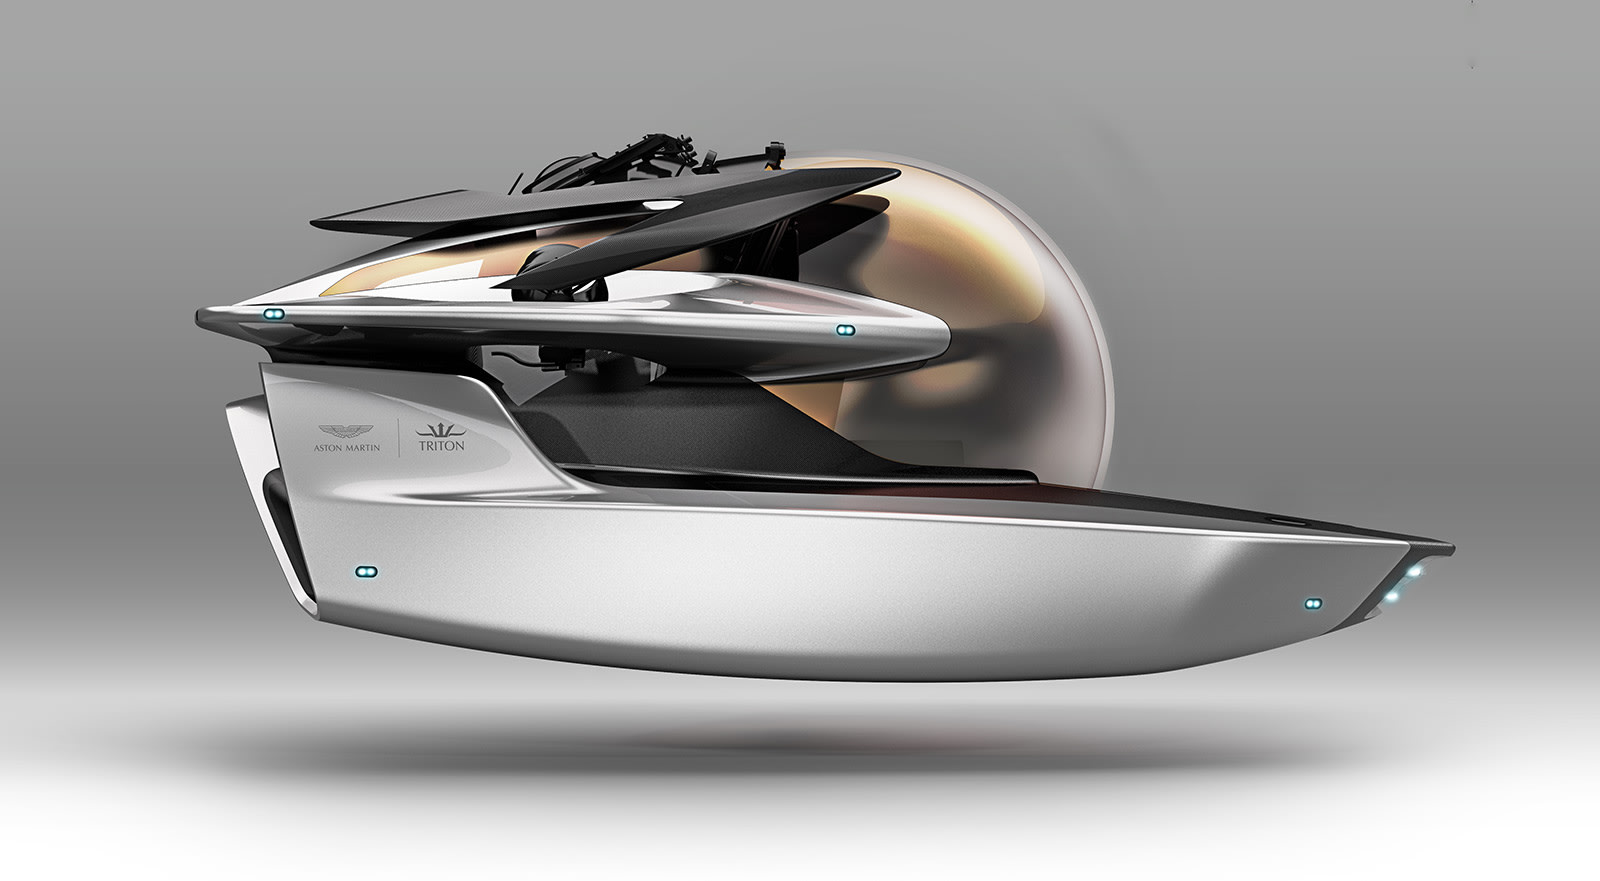 Live out your Bond fantasies with Aston Martin's submarine